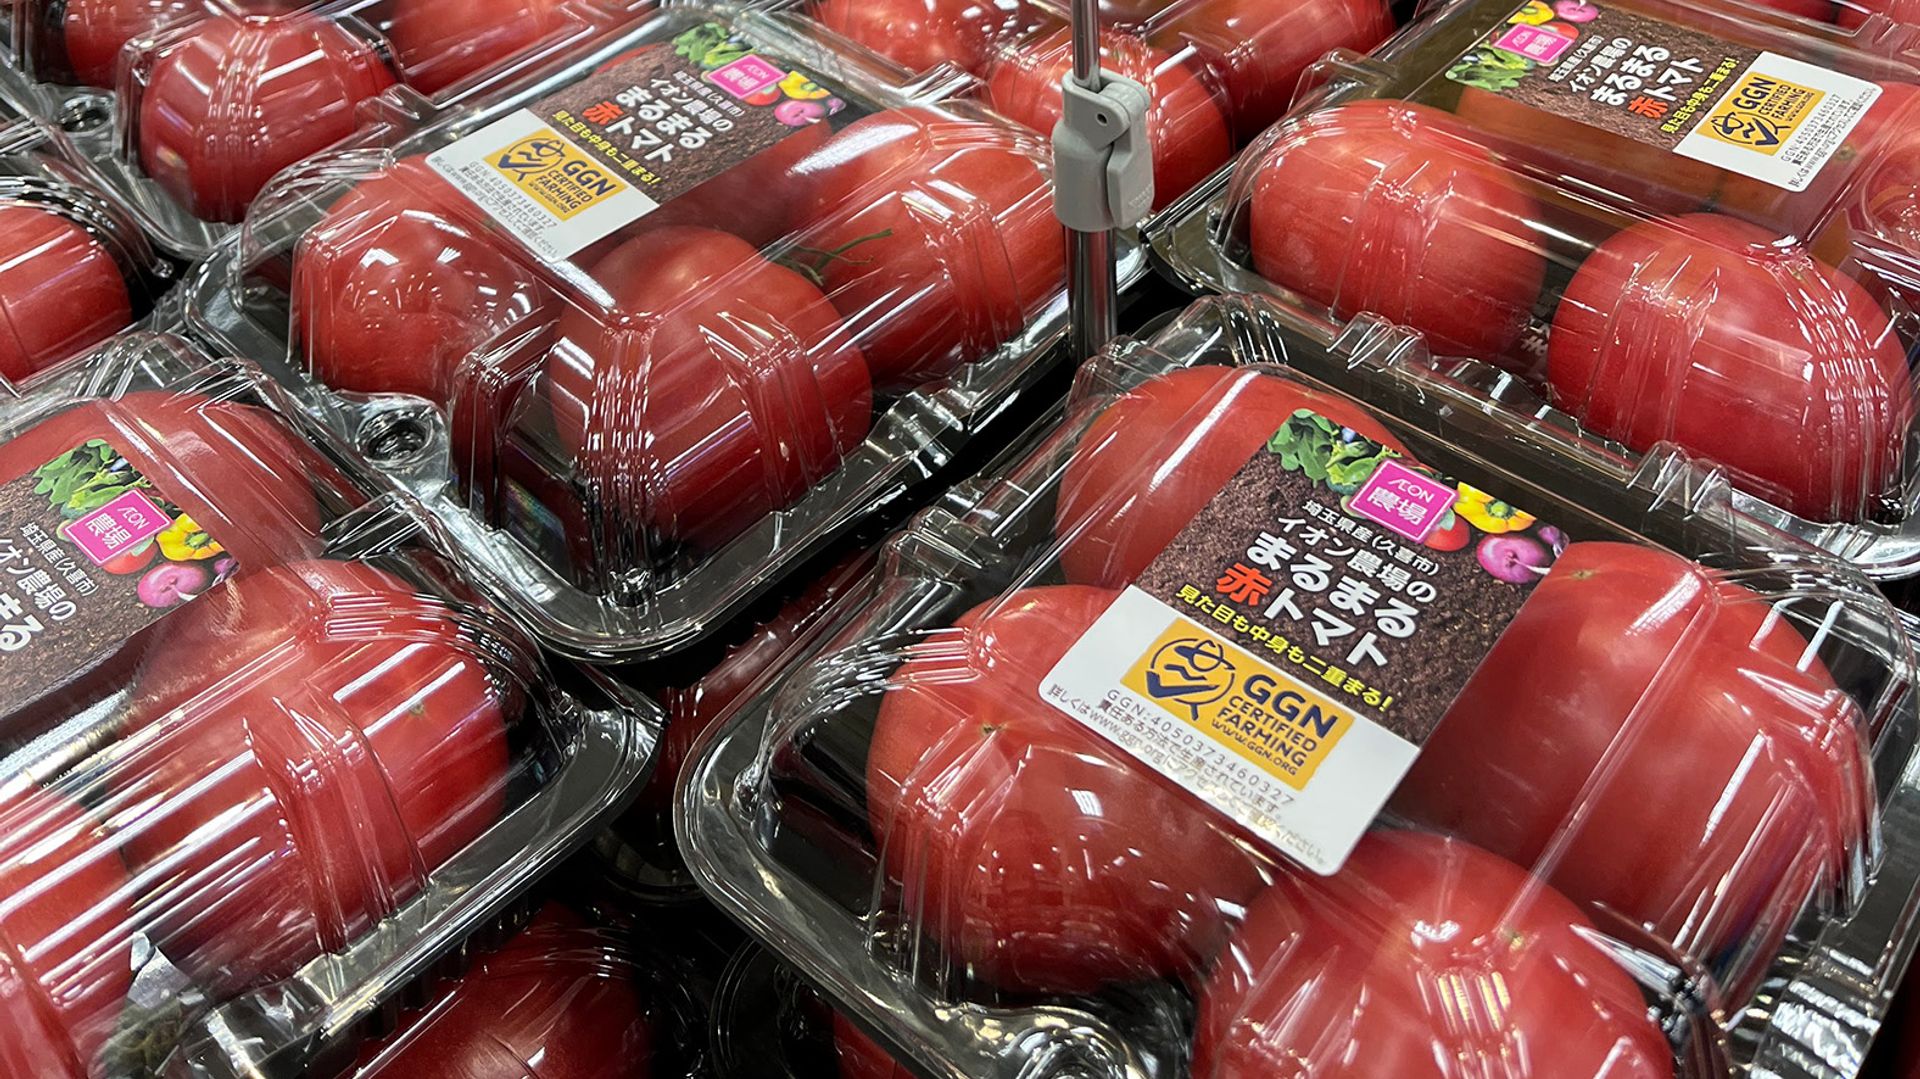 Image of packed tomatoes with the GGN label at a Japanese retail store